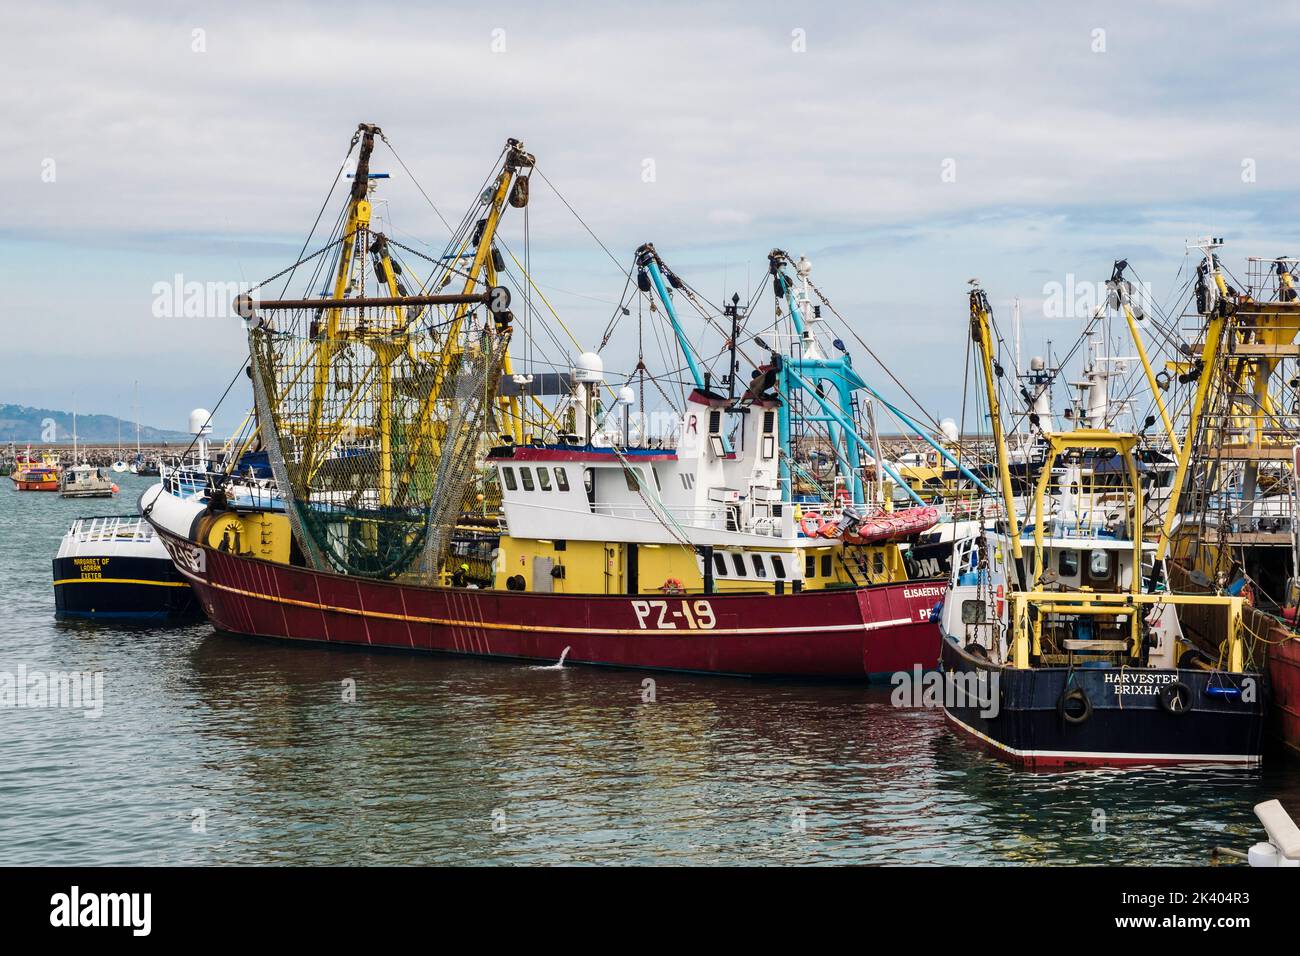 Commercial fishing trawlers in port in the outer harbour. Brixham, Devon, England, UK, Britain Stock Photo